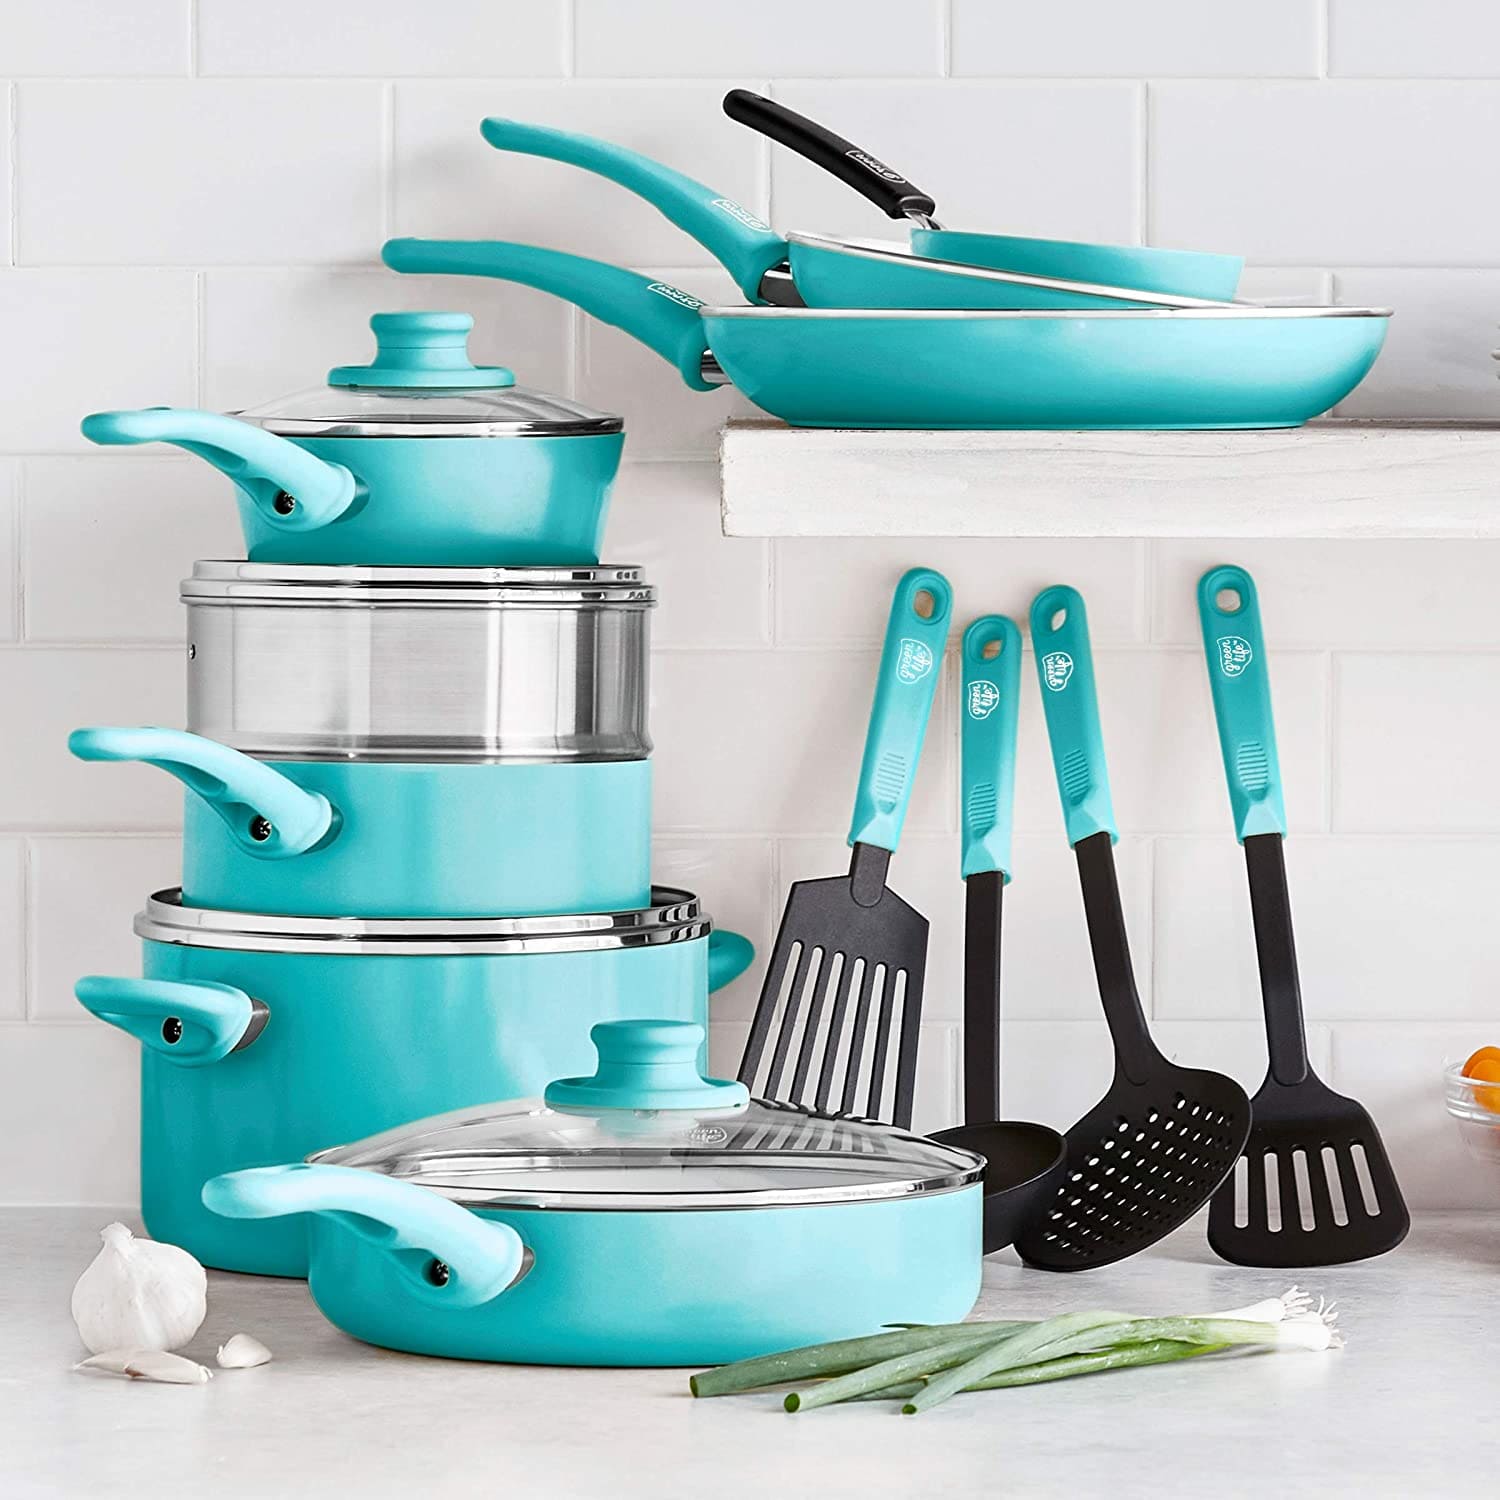 greenlife soft grip pots and pans